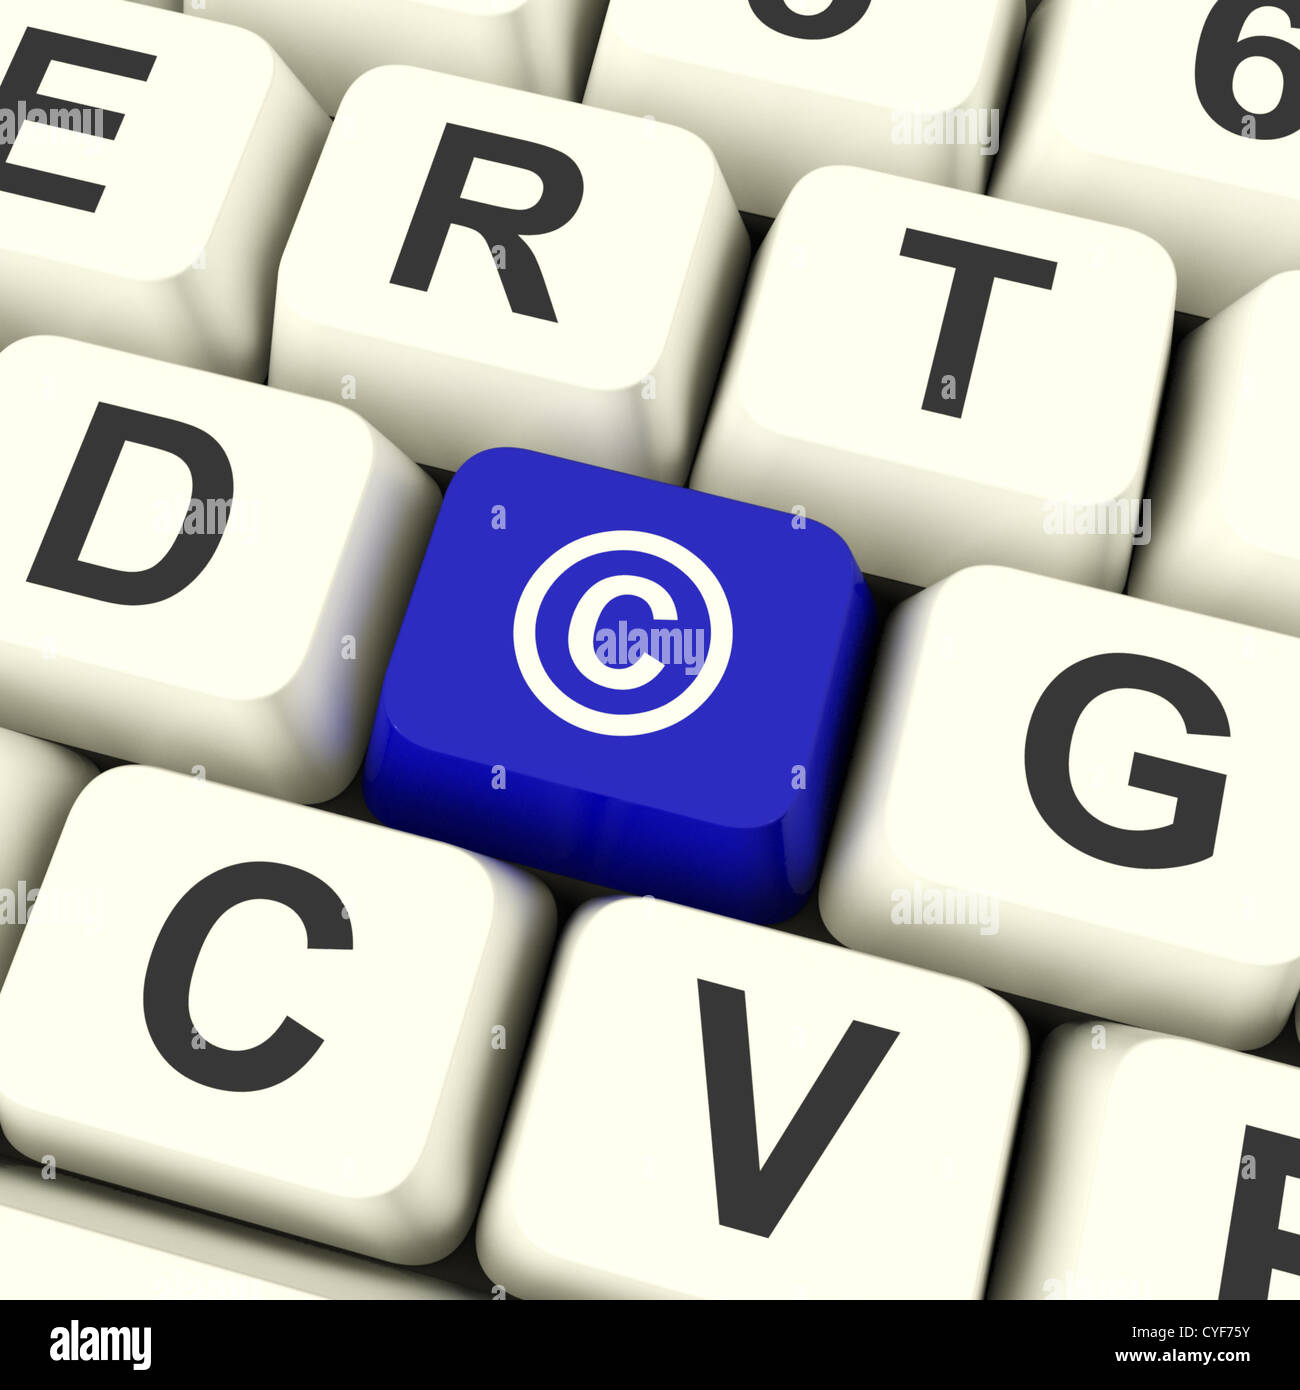 Copyright Blue Computer Key Showing Patent Or Trademarks Stock Photo